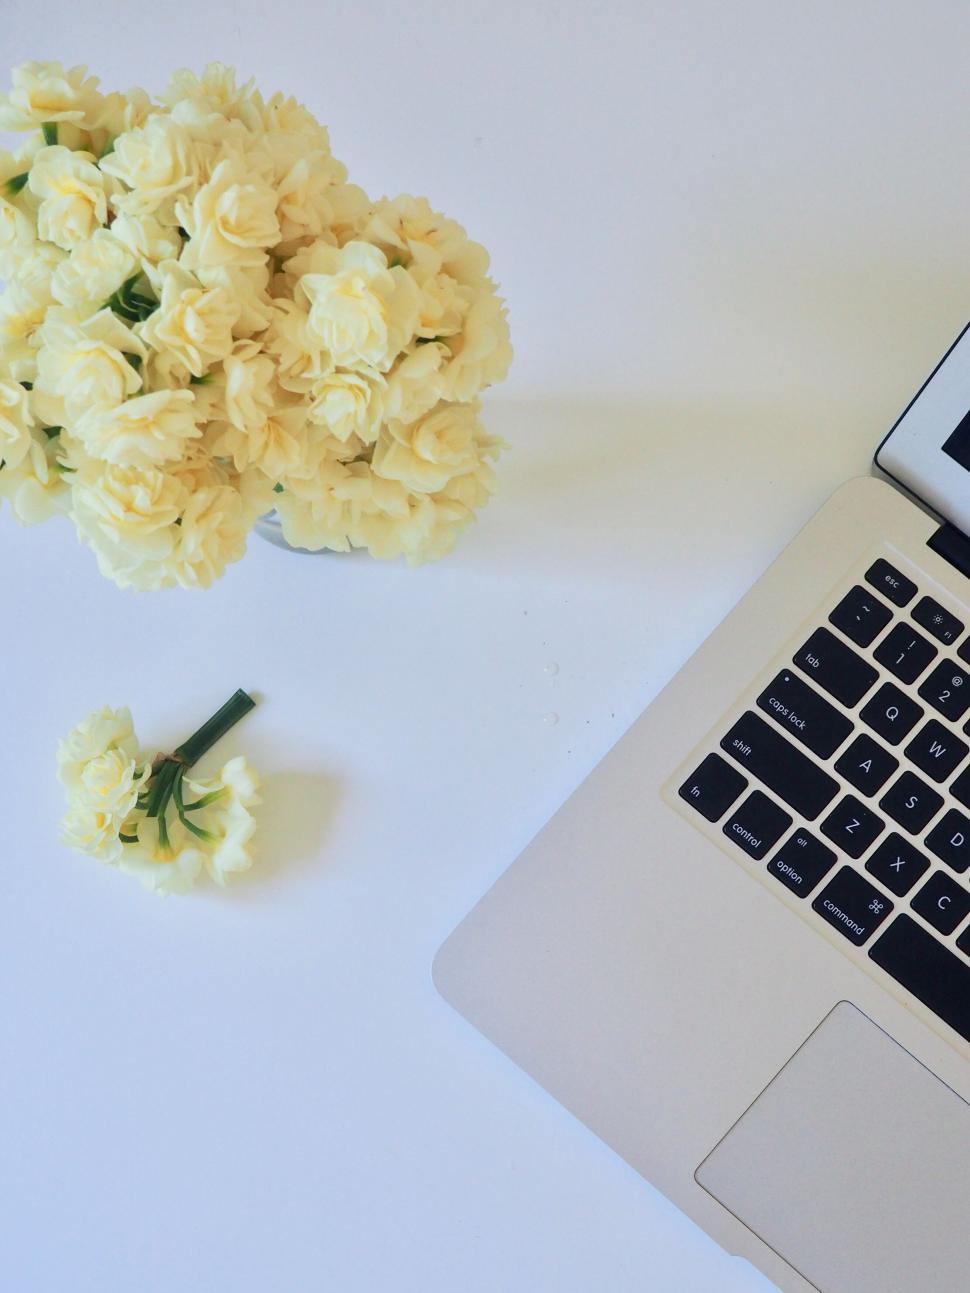 Free Image of Laptop with yellow carnations on white desk 